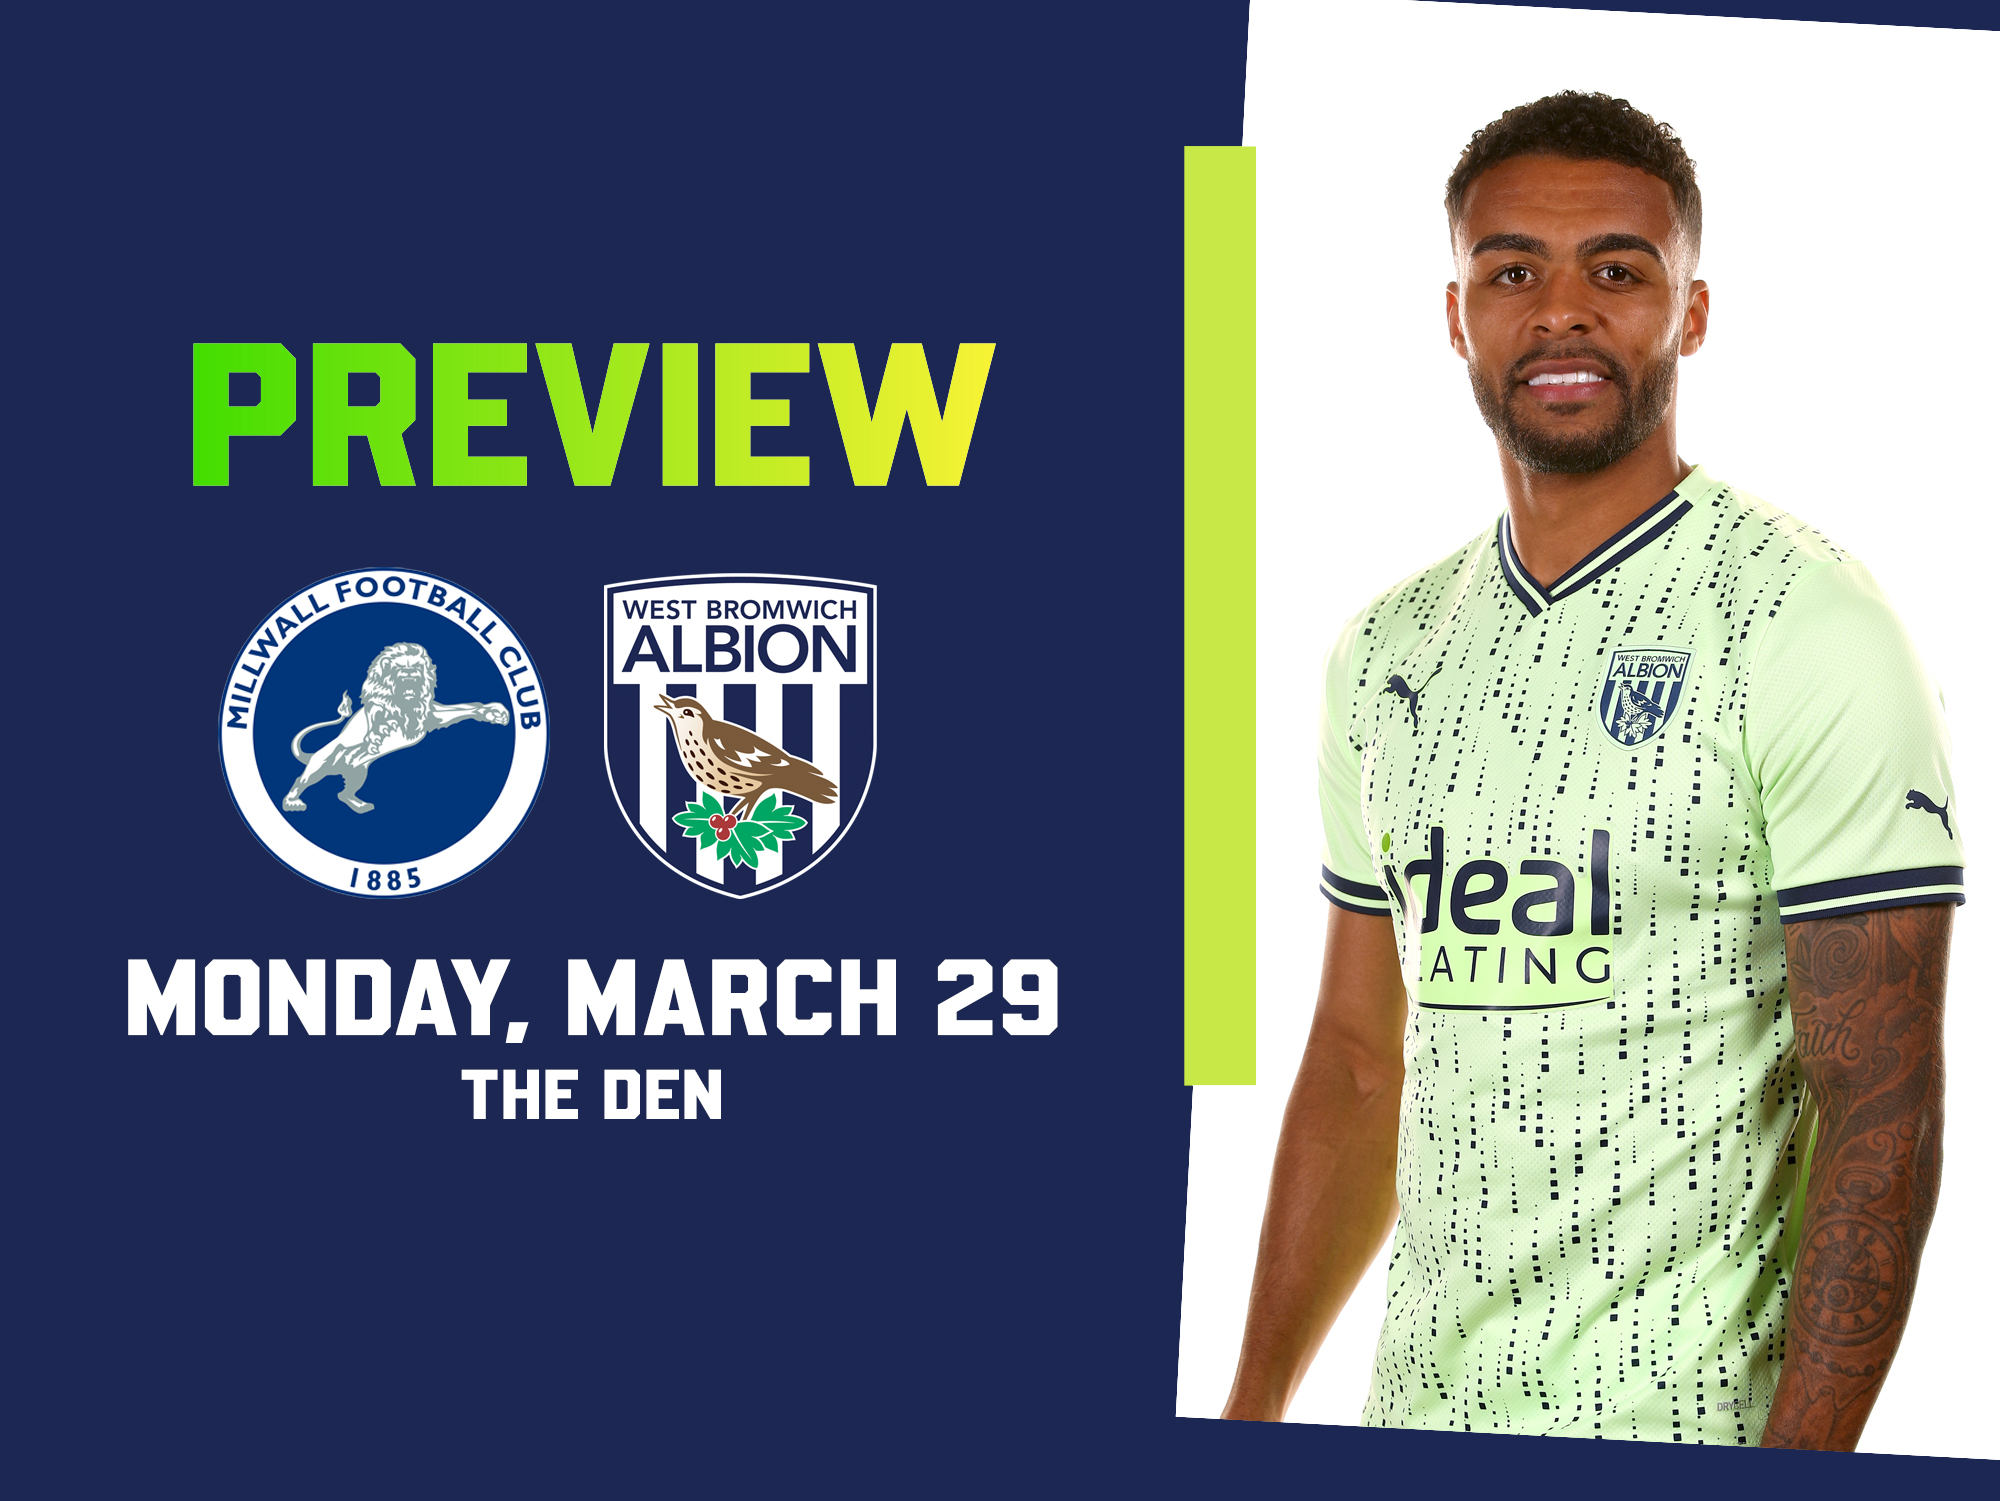 England - West Bromwich Albion FC - Results, fixtures, squad, statistics,  photos, videos and news - Soccerway